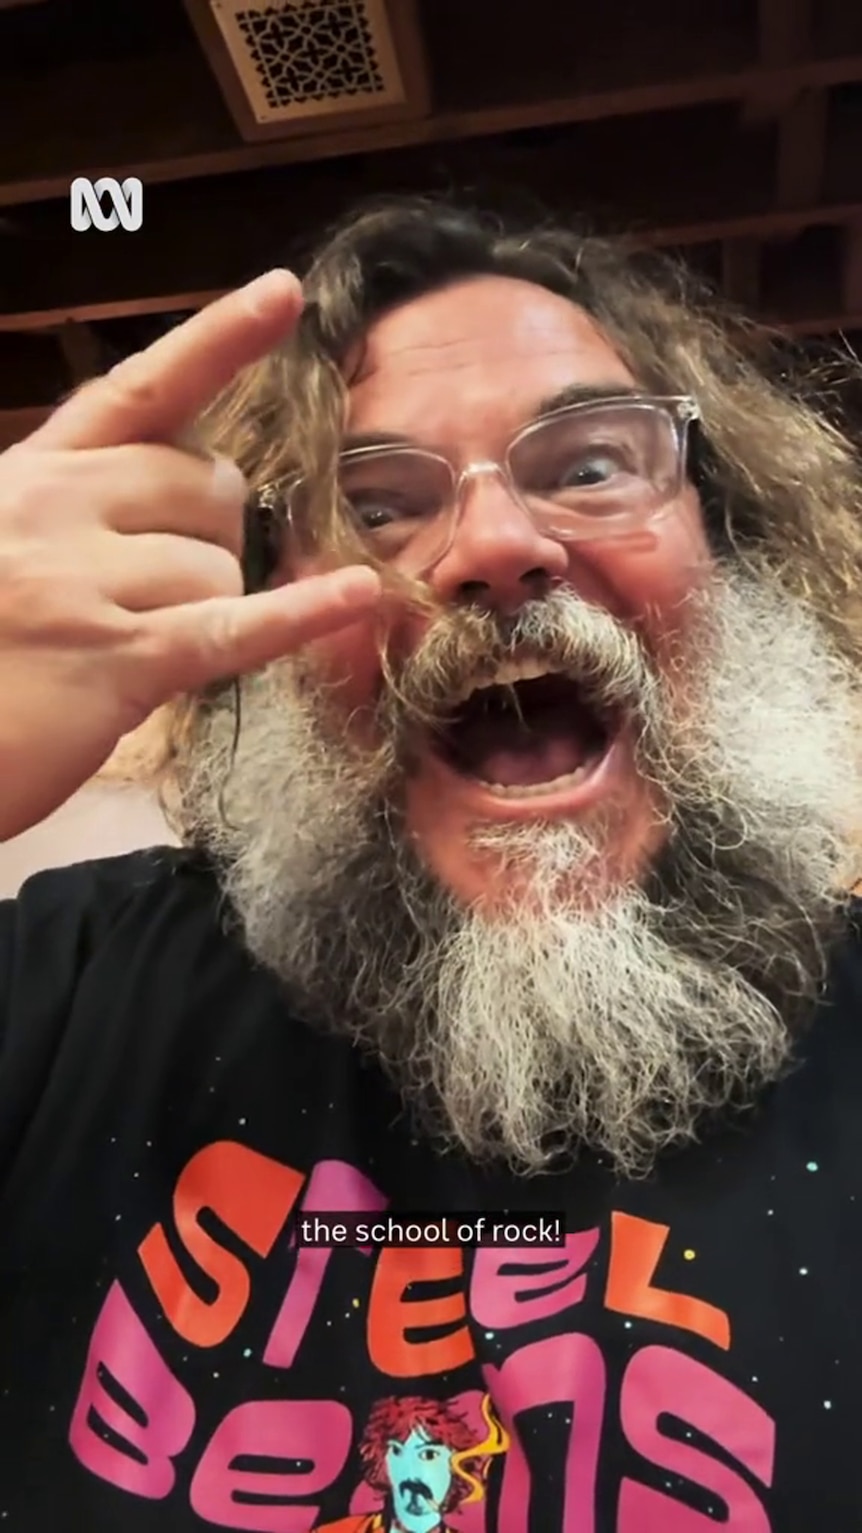 Jack Black, wearing glasses with a long beard, flashes the rock gesture with exaggerated facial expressions 